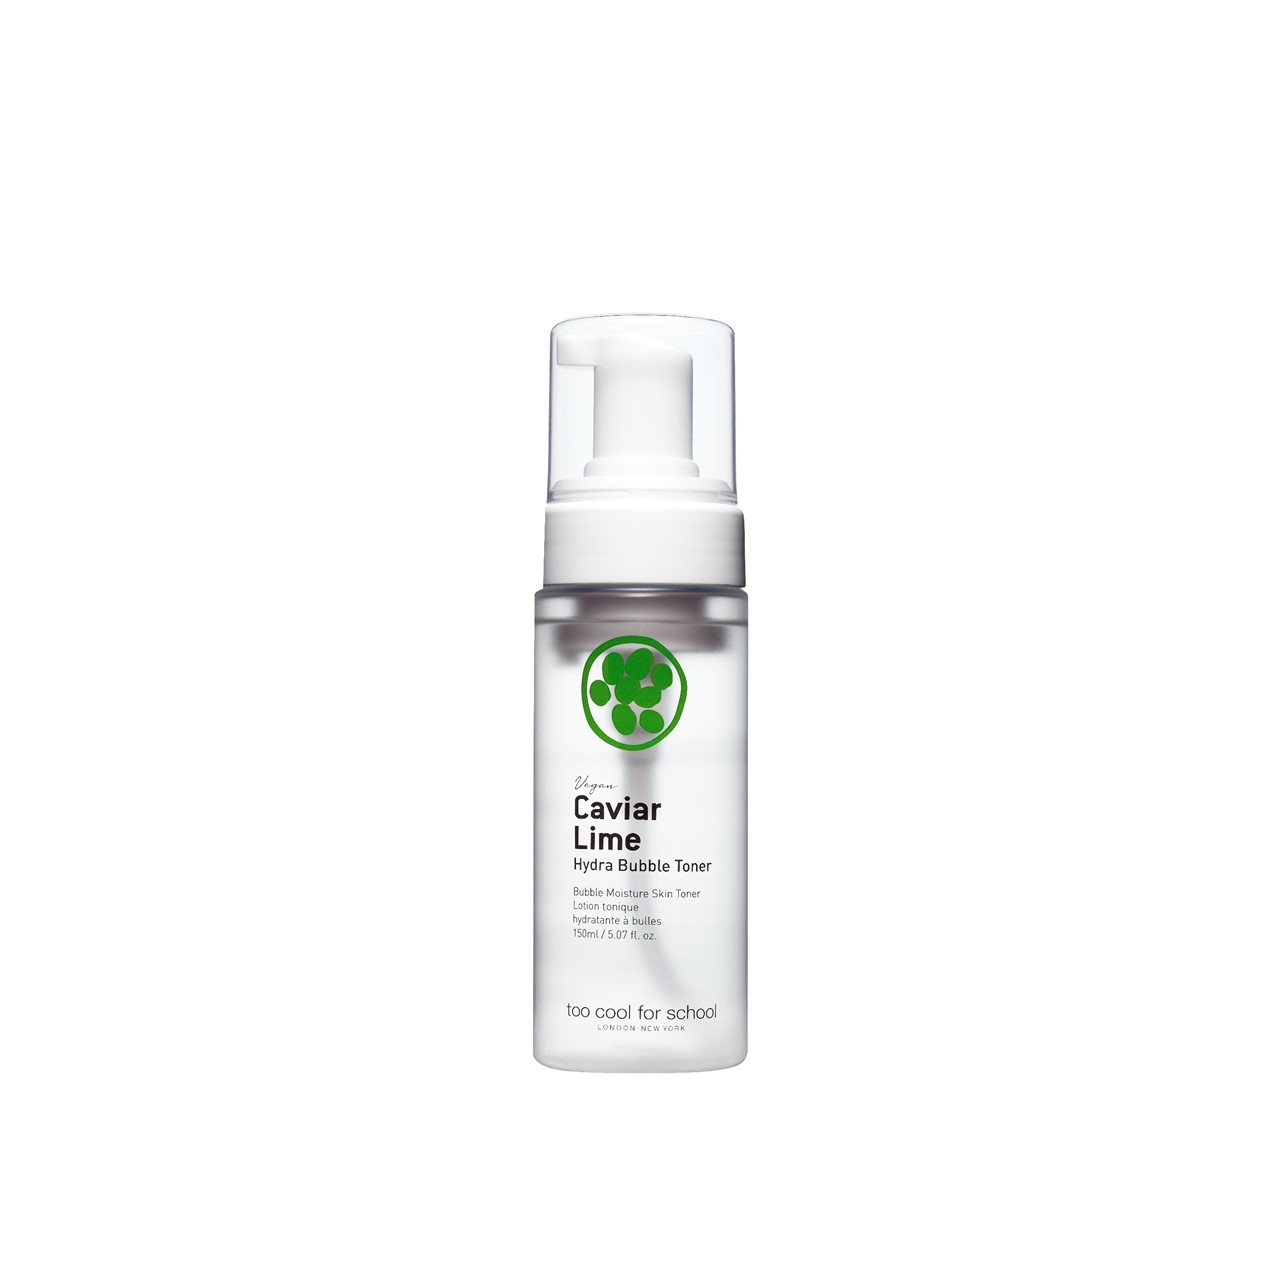 Too Cool For School Caviar Lime Hydra Bubble Toner 150ml